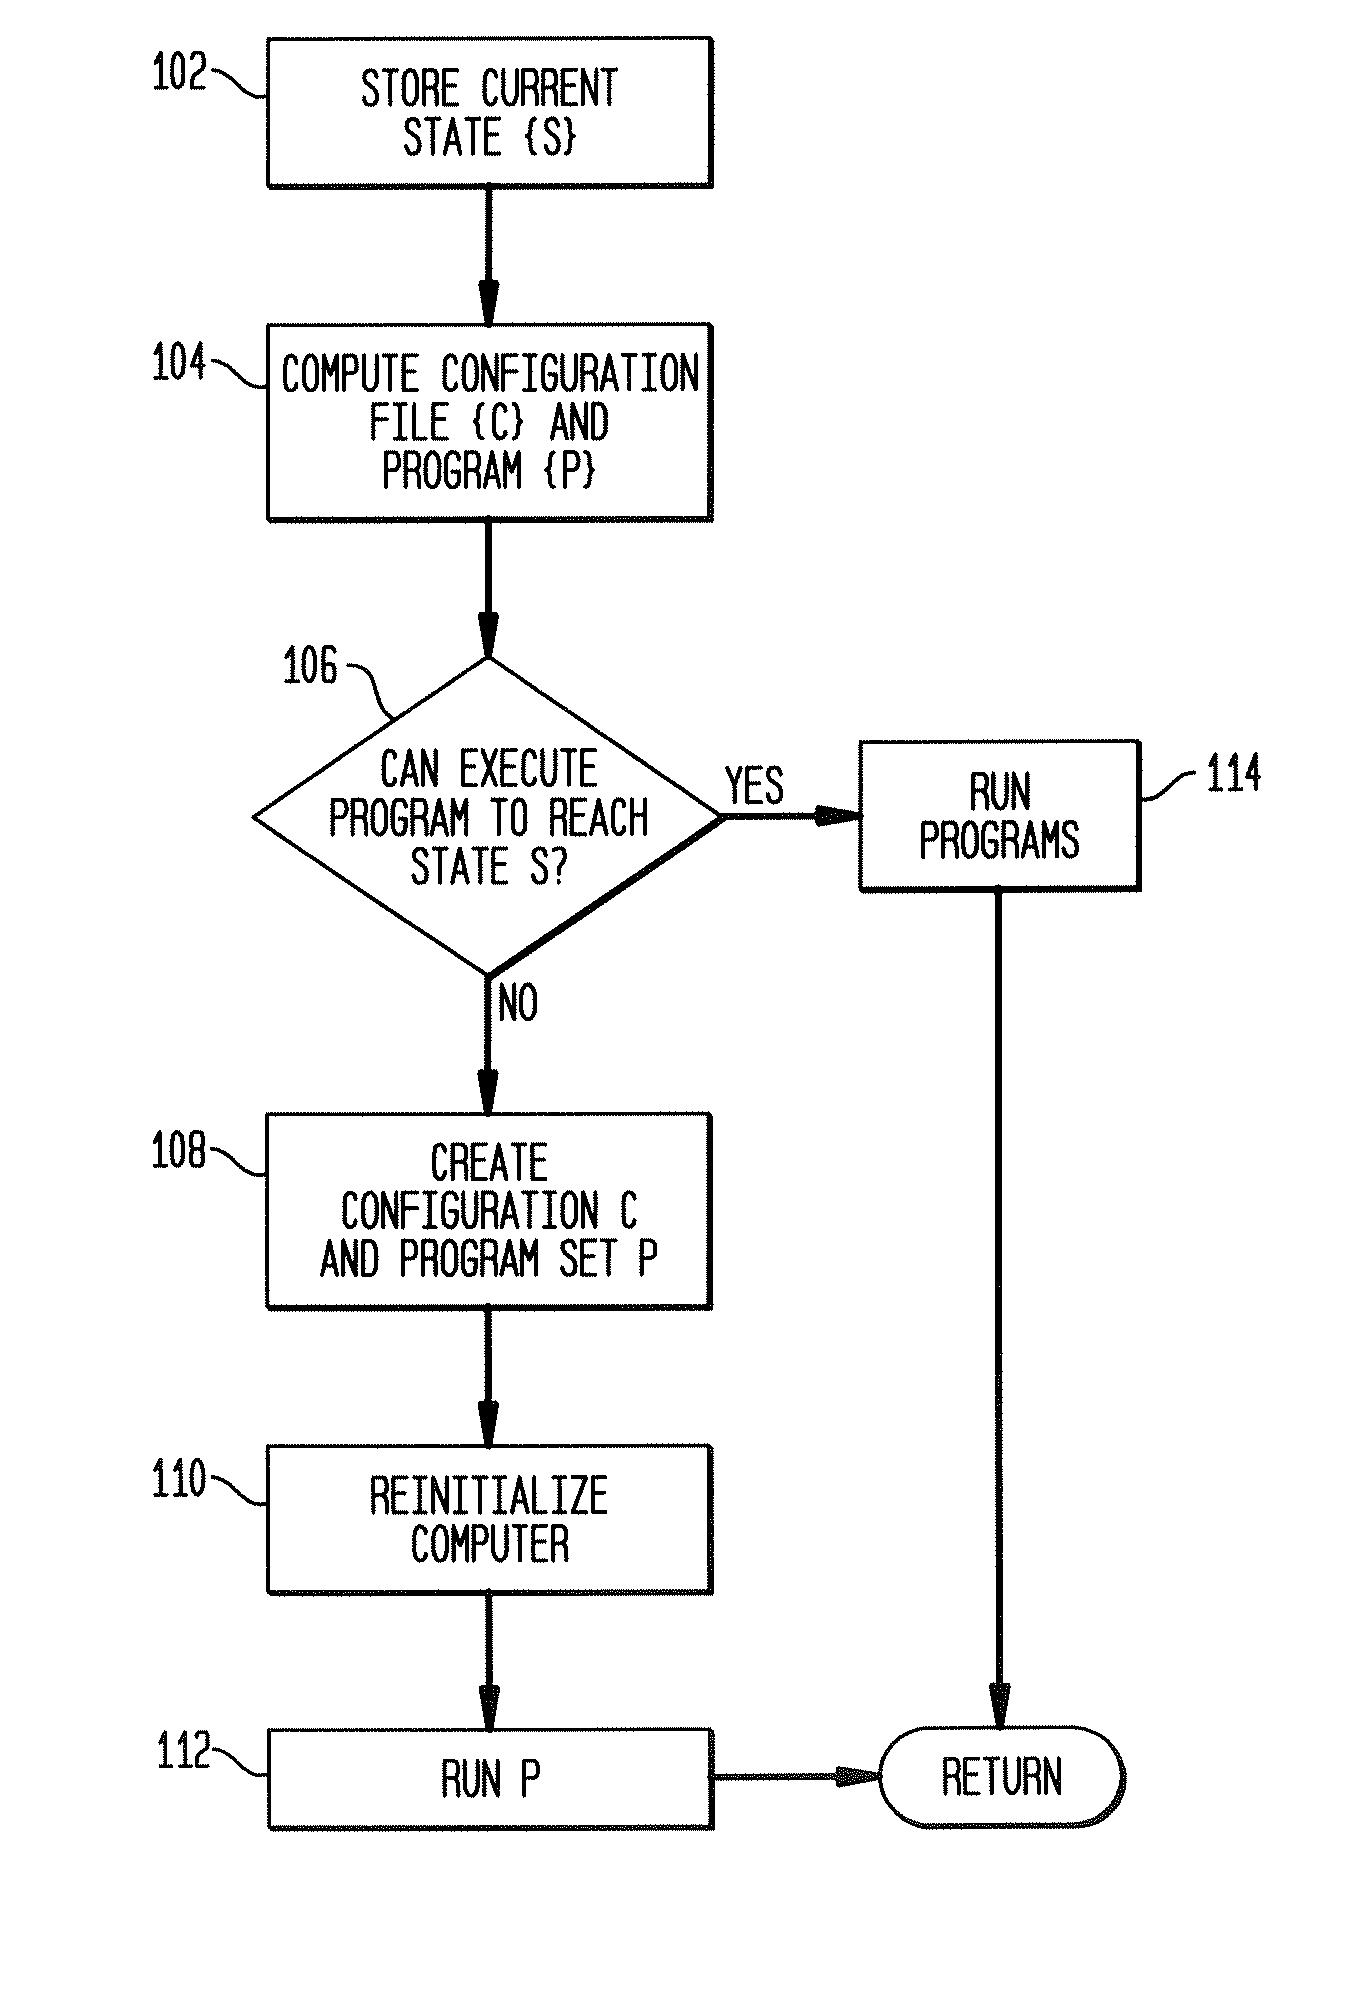 Computer configuration tracking system able to restore a previous configuration